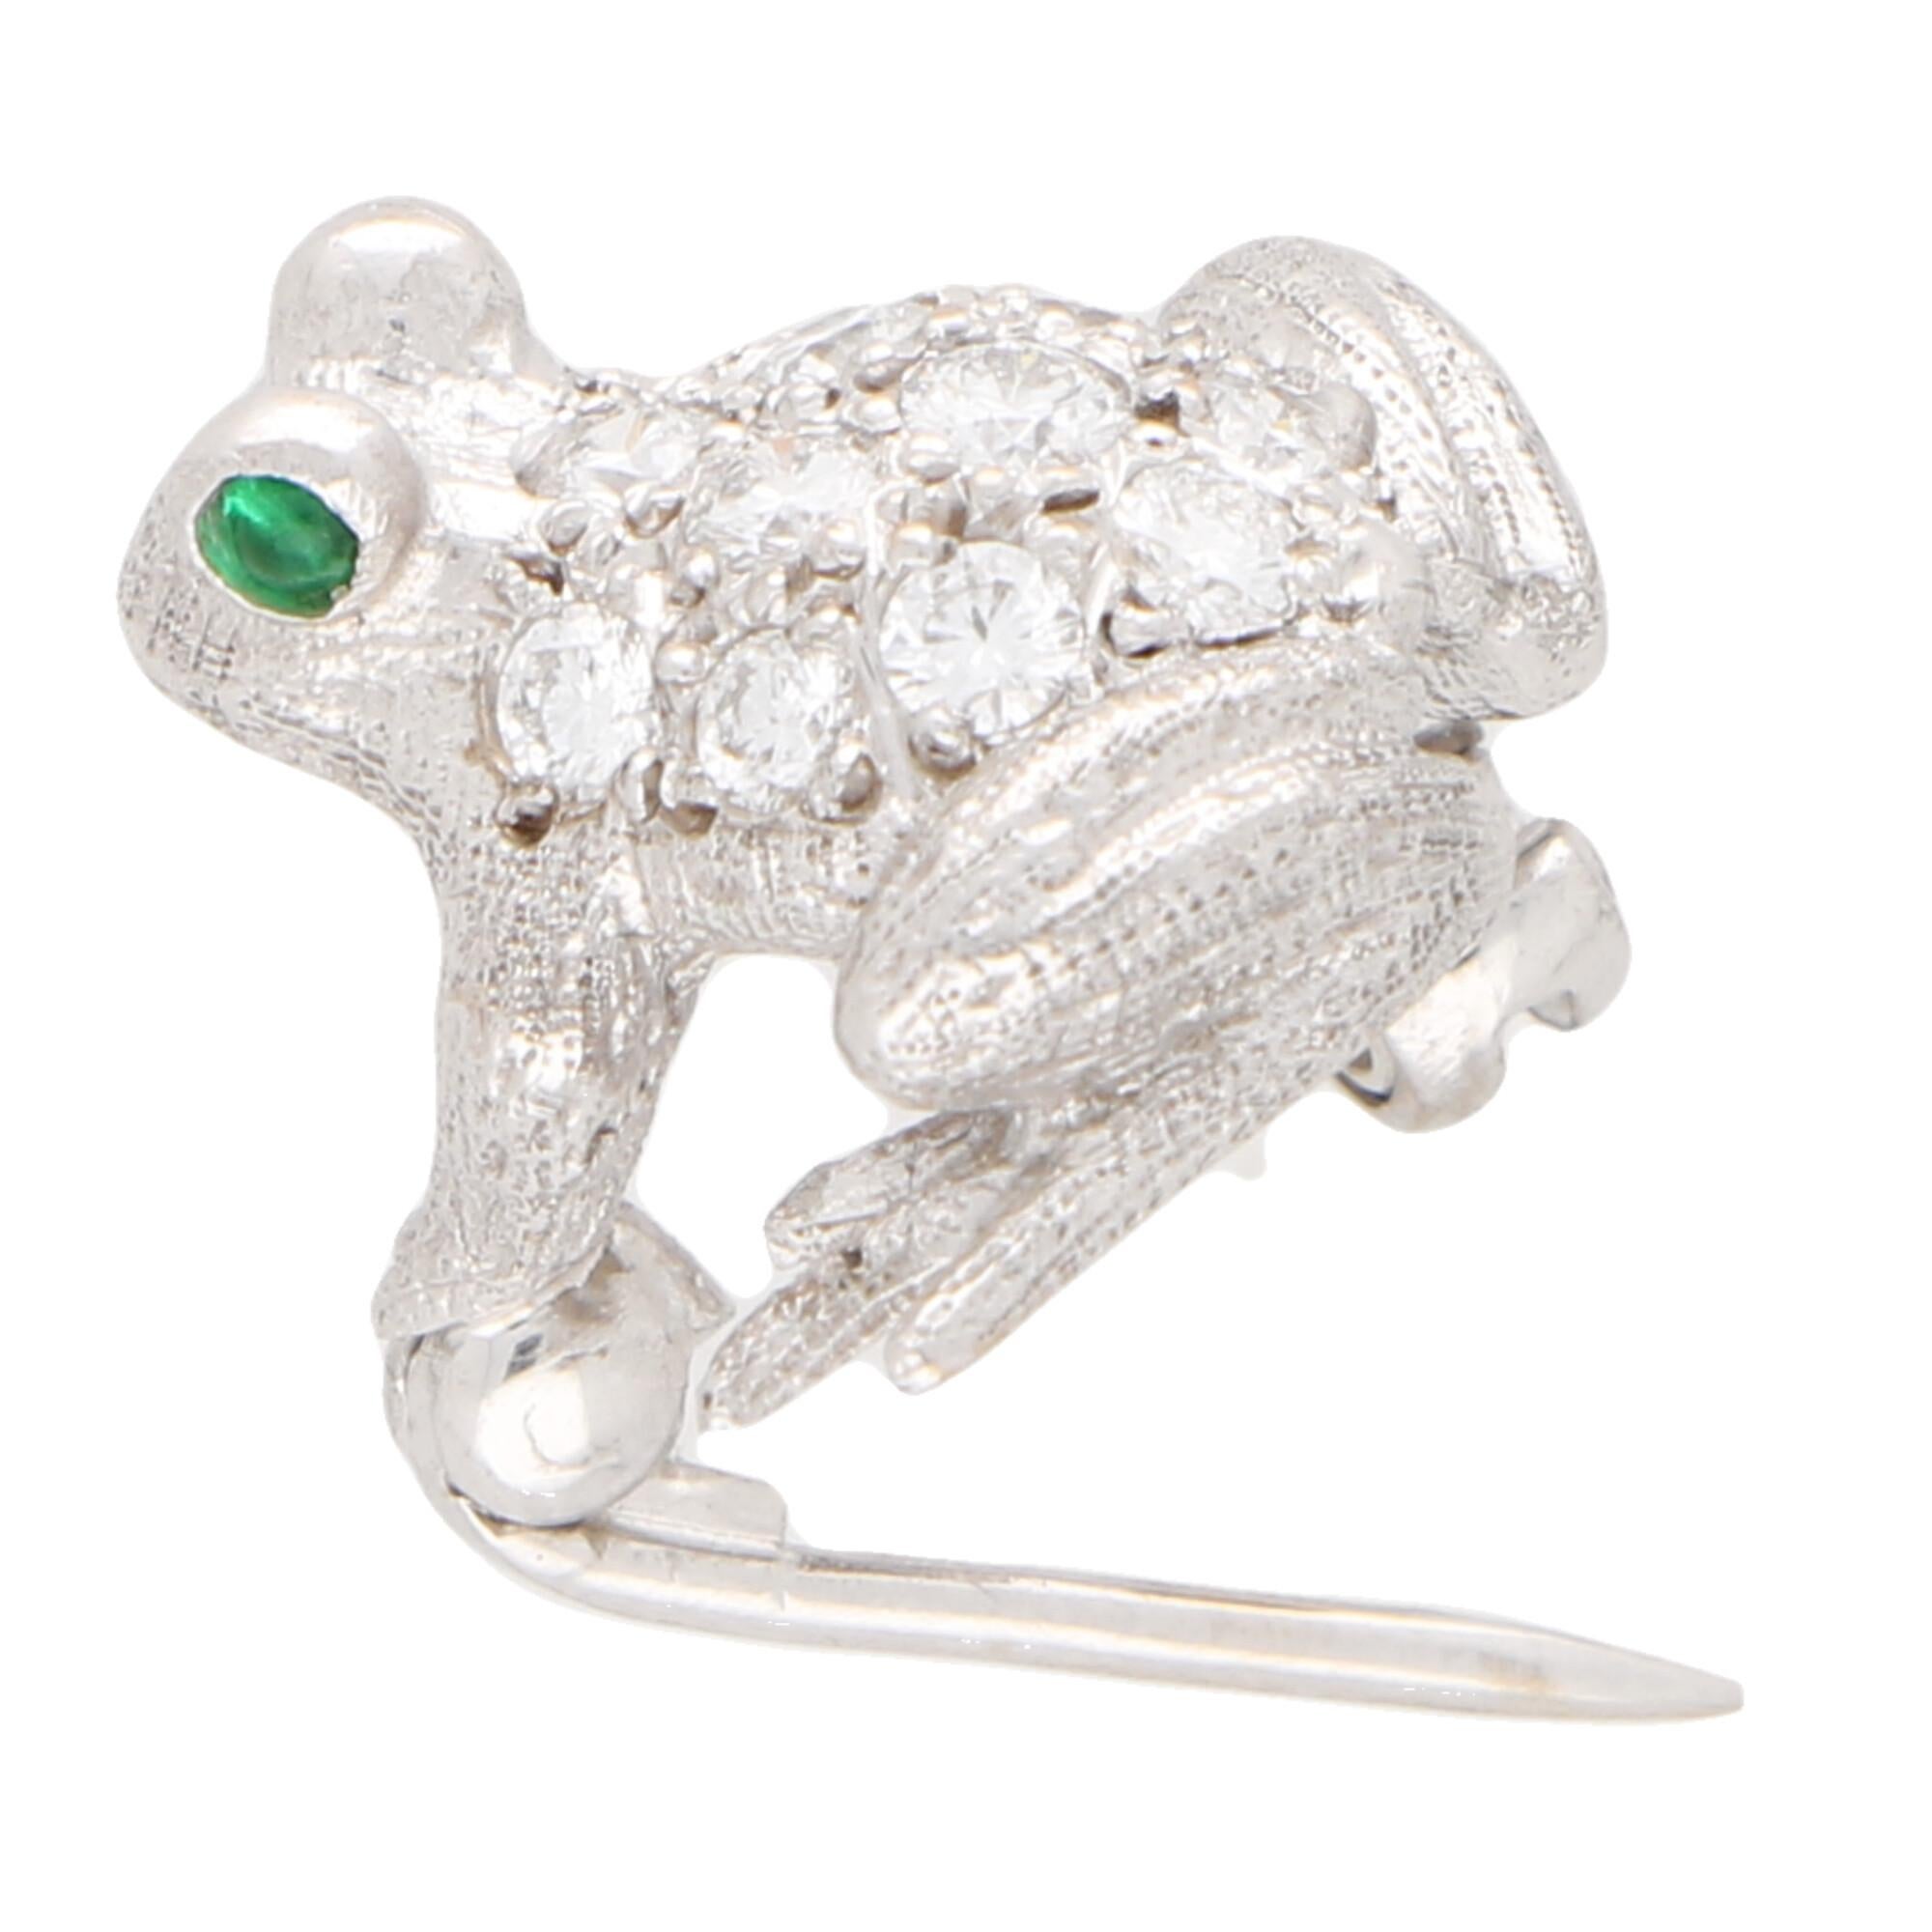 Round Cut Diamond and Emerald Frog Pin Brooch Set in 18 Karat White Gold